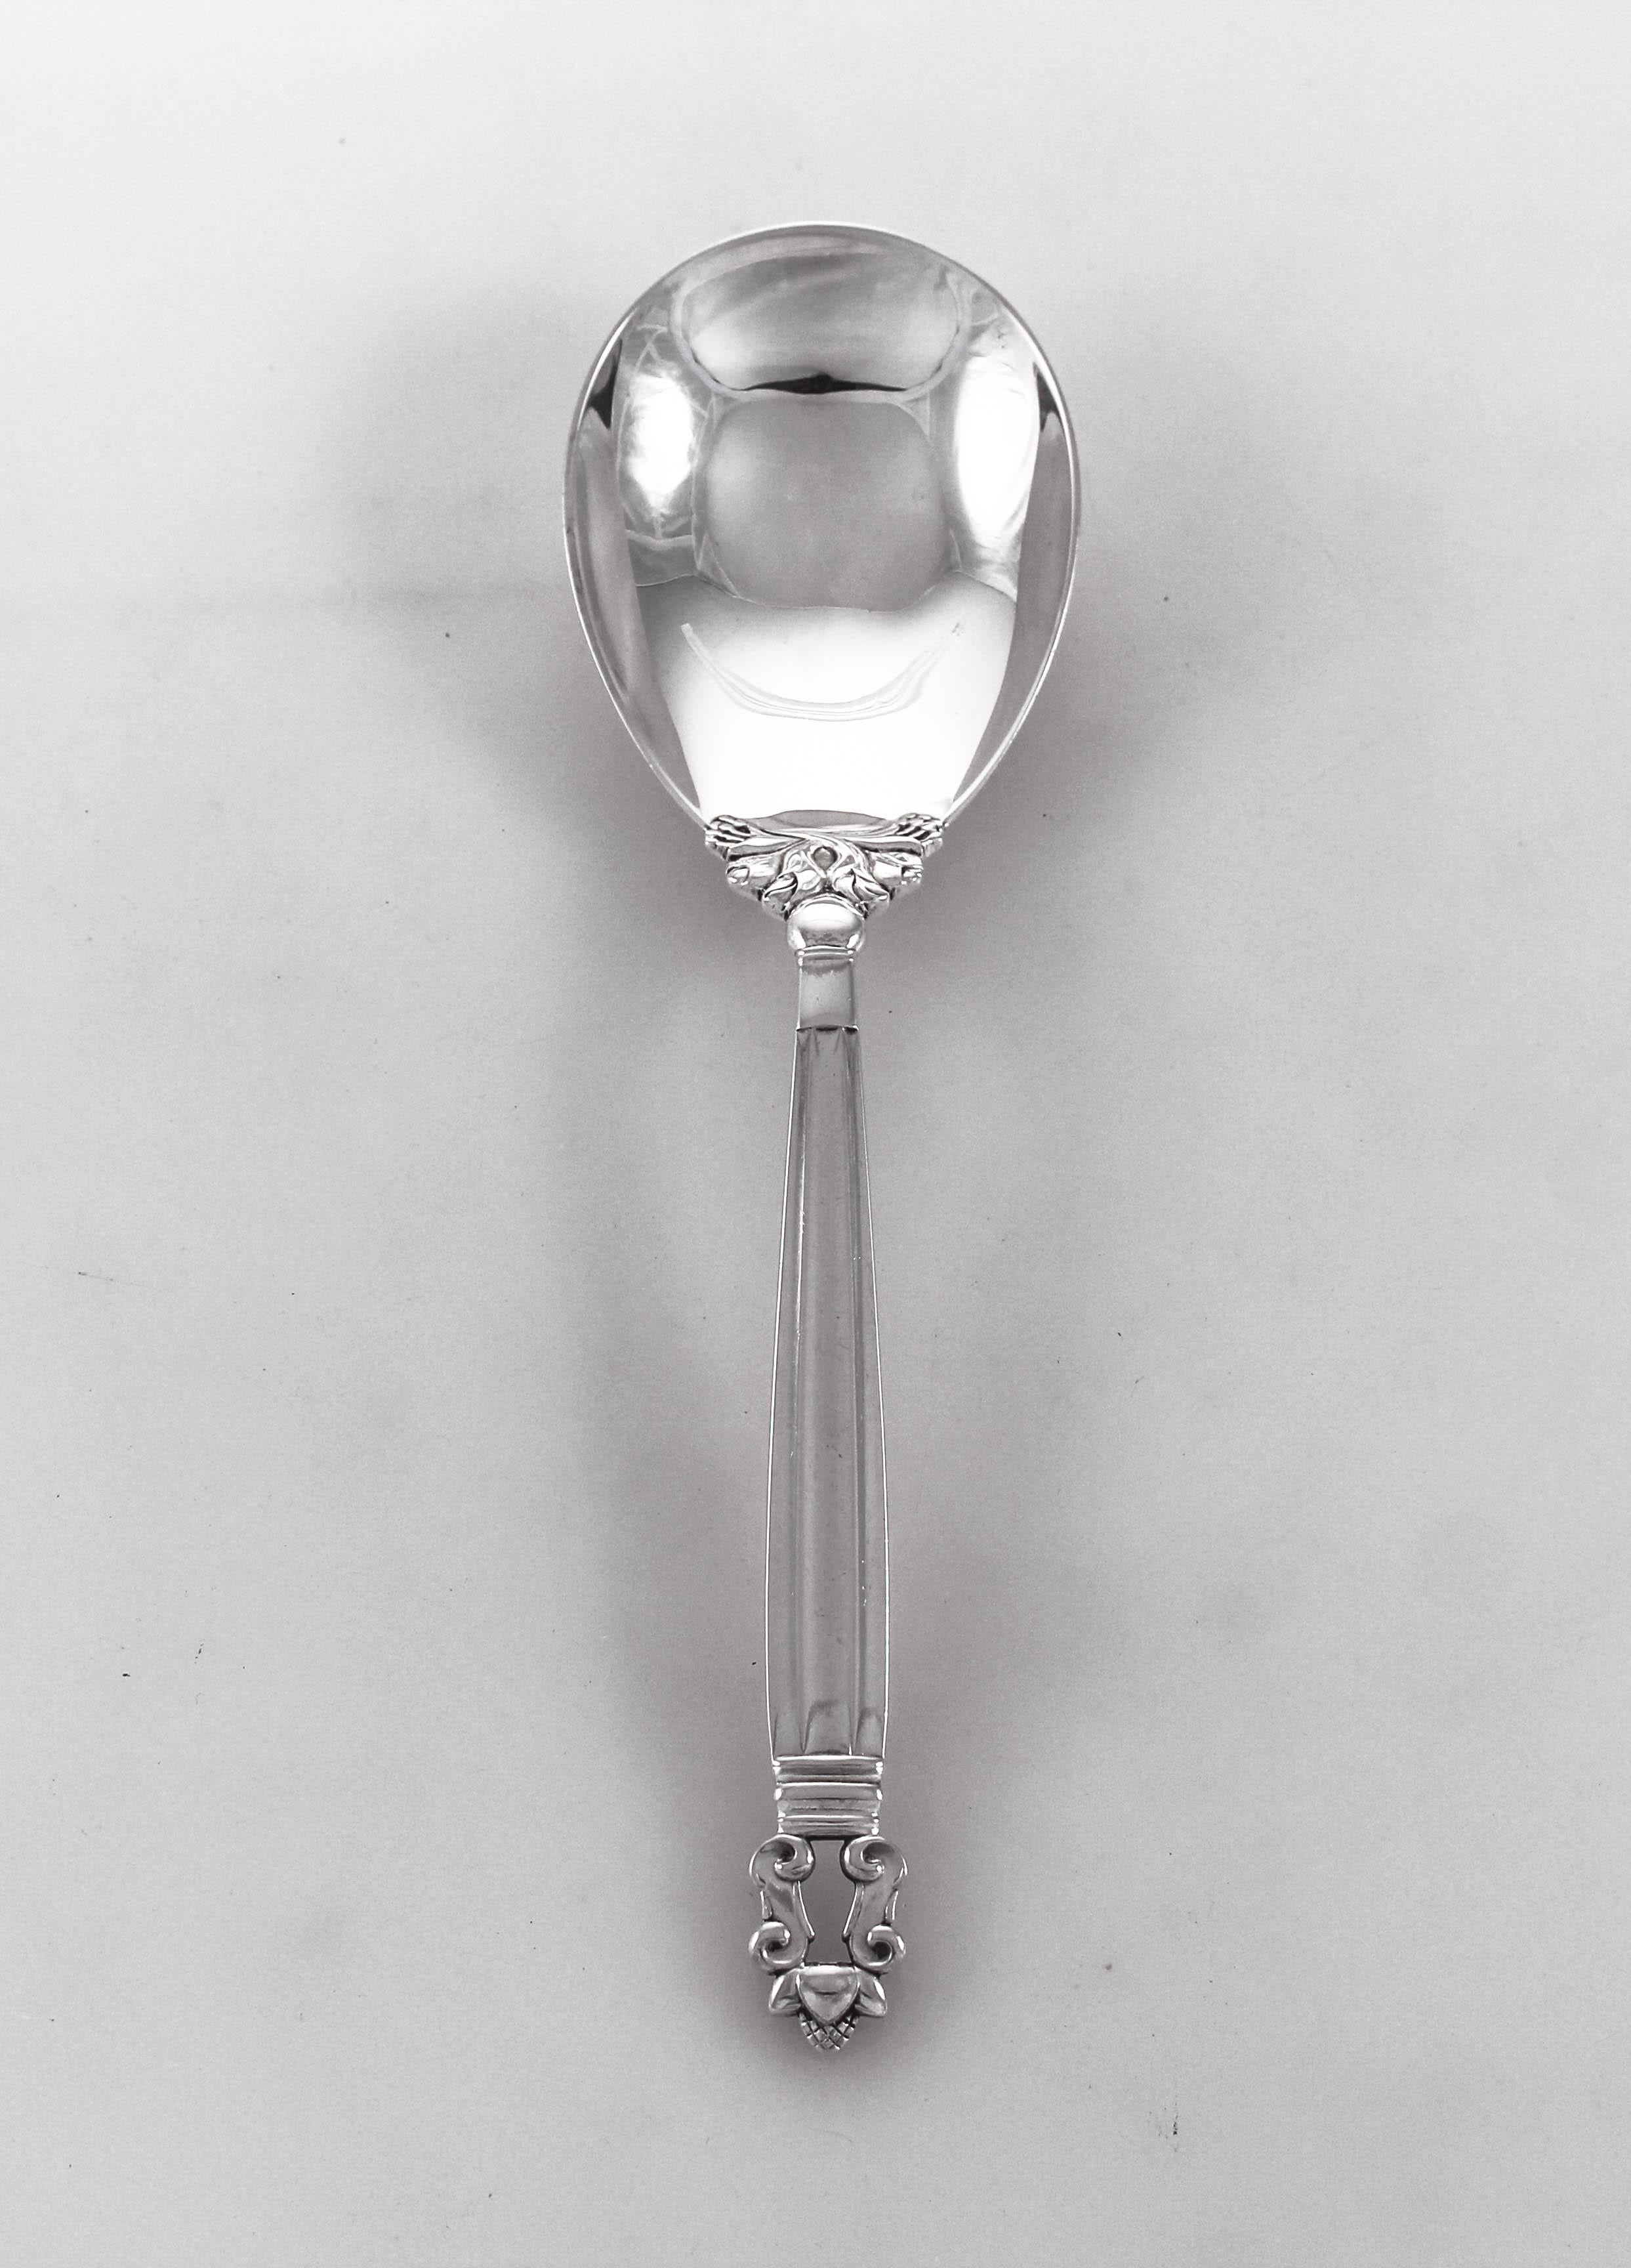 We are delighted to offer this sterling silver salad set In the Acorn pattern by the world renowned Danish silversmith Georg Jensen. Celebrated as the finest silversmith, Jensen silver pieces are very sought after. This fork and spoon set will be